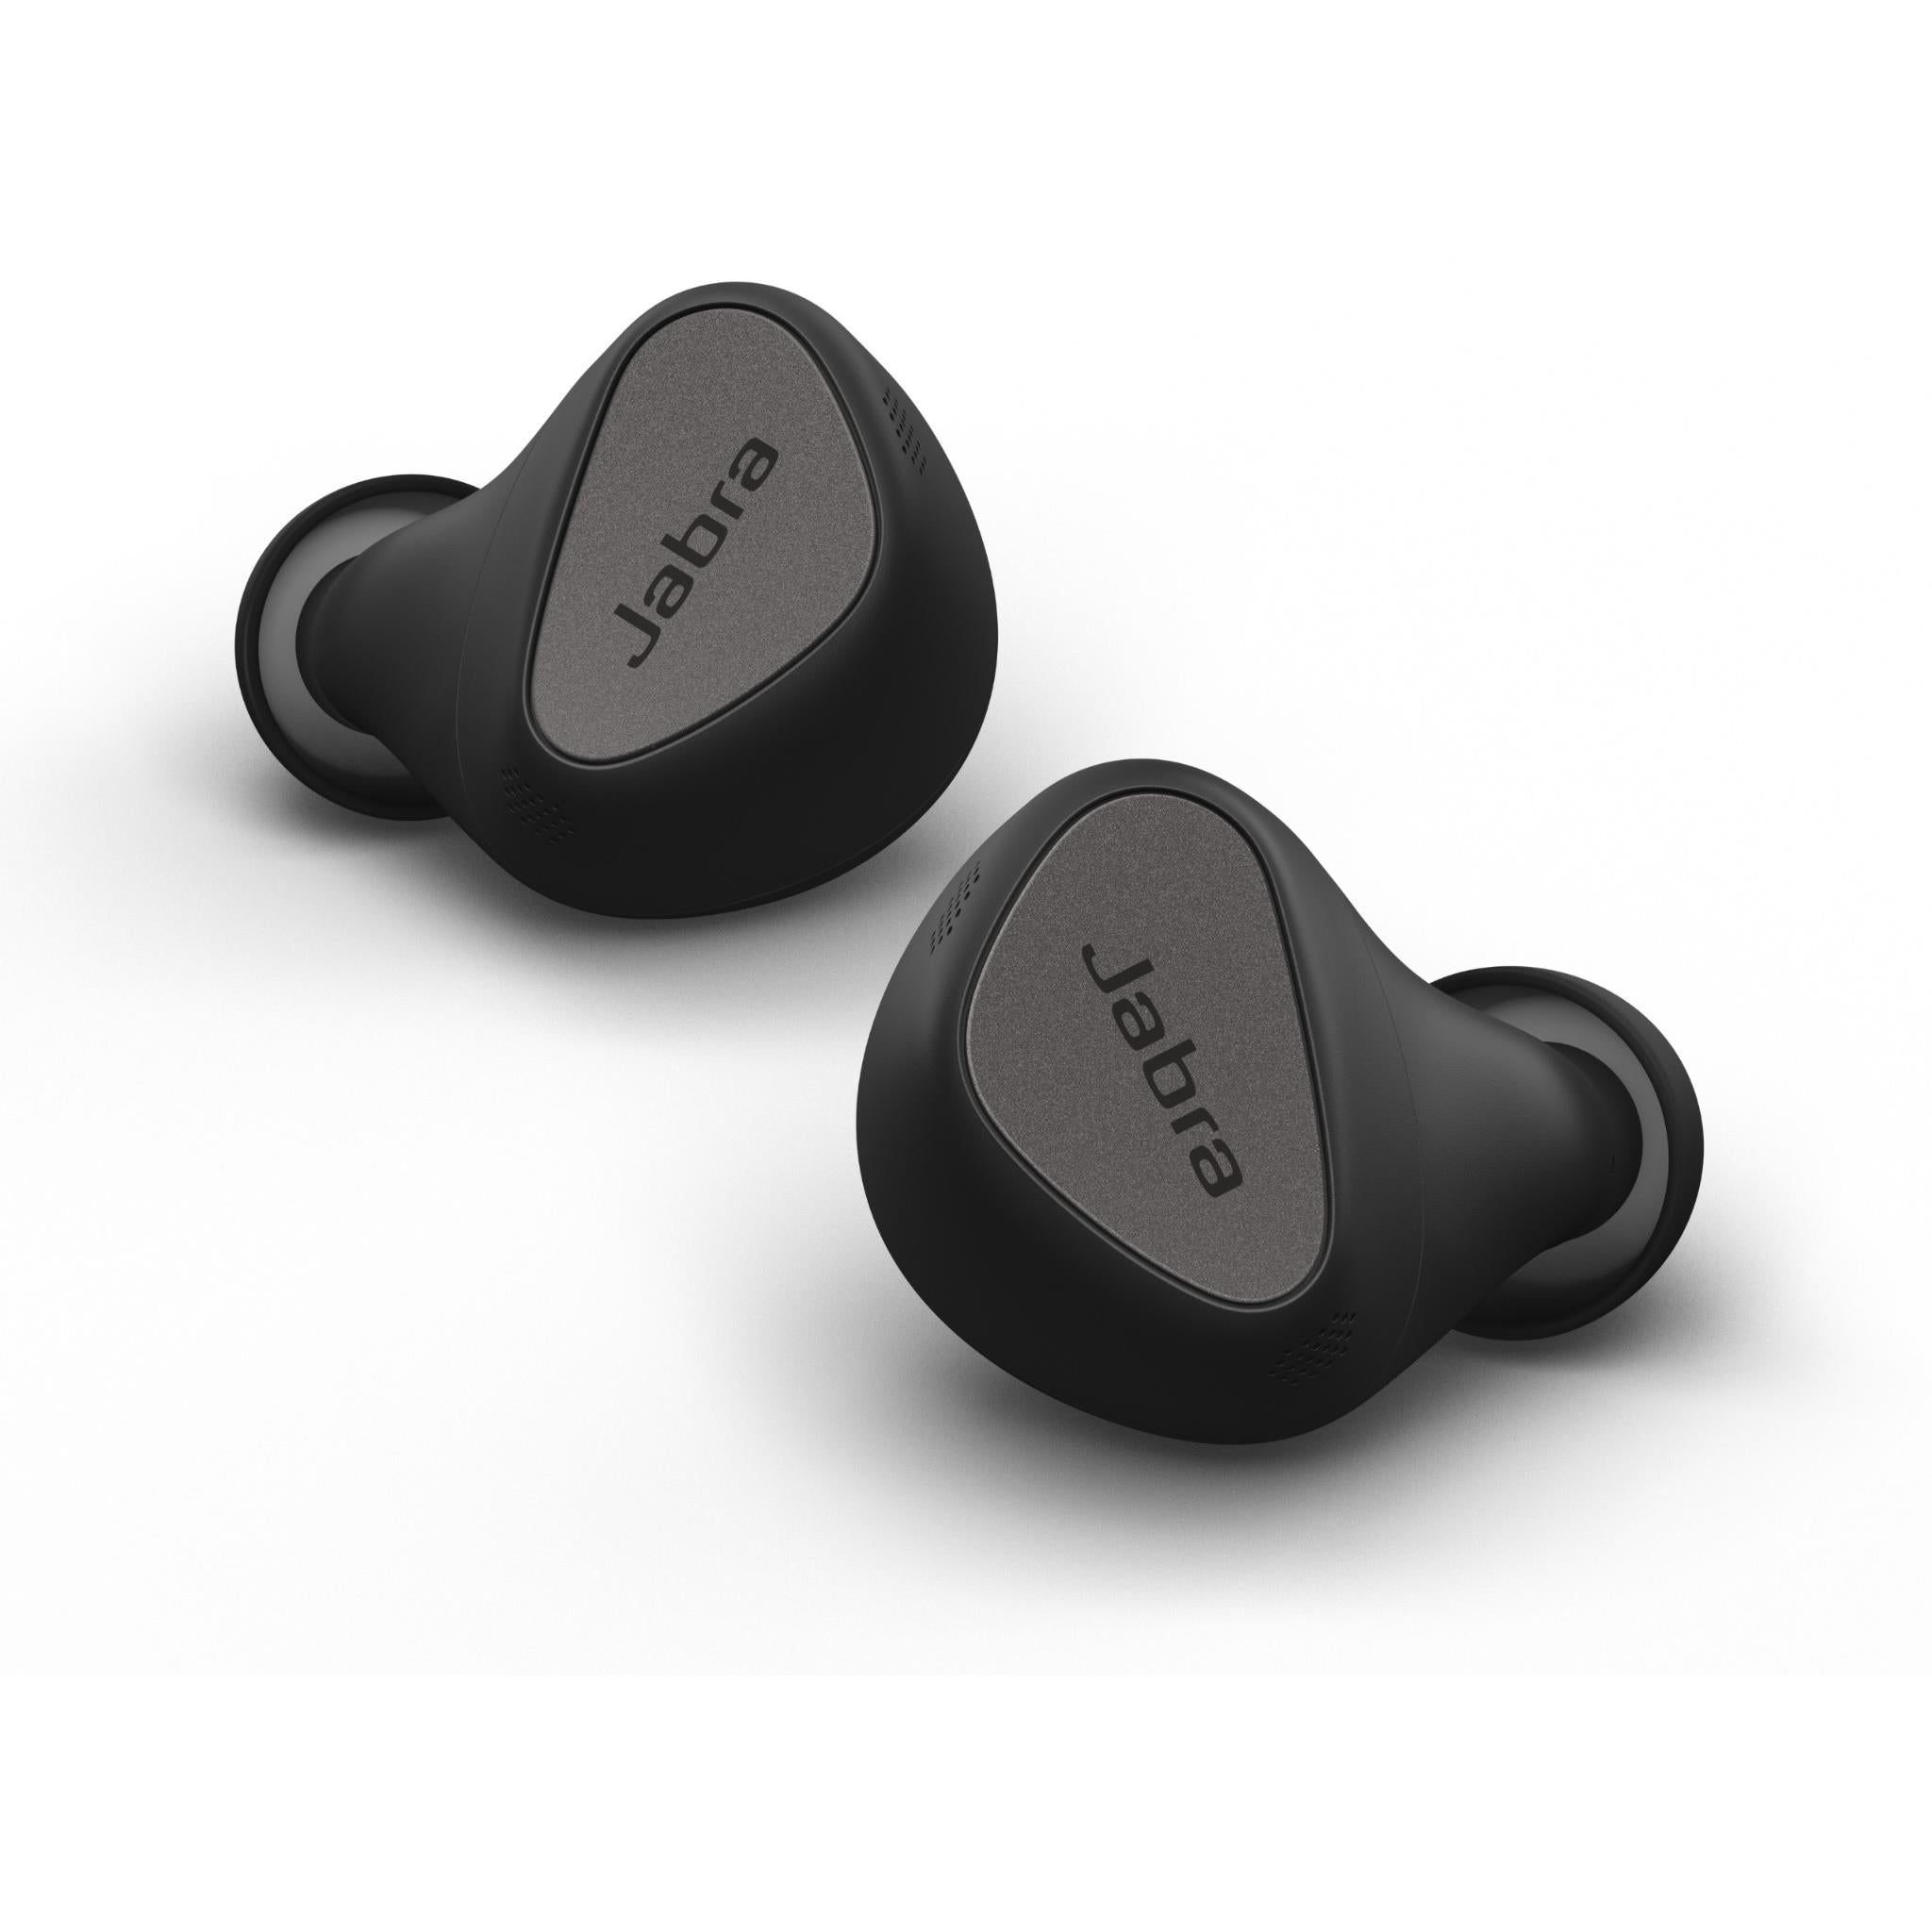  Jabra Elite 5 True Wireless in-Ear Bluetooth Earbuds - Hybrid  Active Noise Cancellation (ANC), 6 Built-in Microphones for Clear Calls –  Black, with $25  Gift Card : Electronics